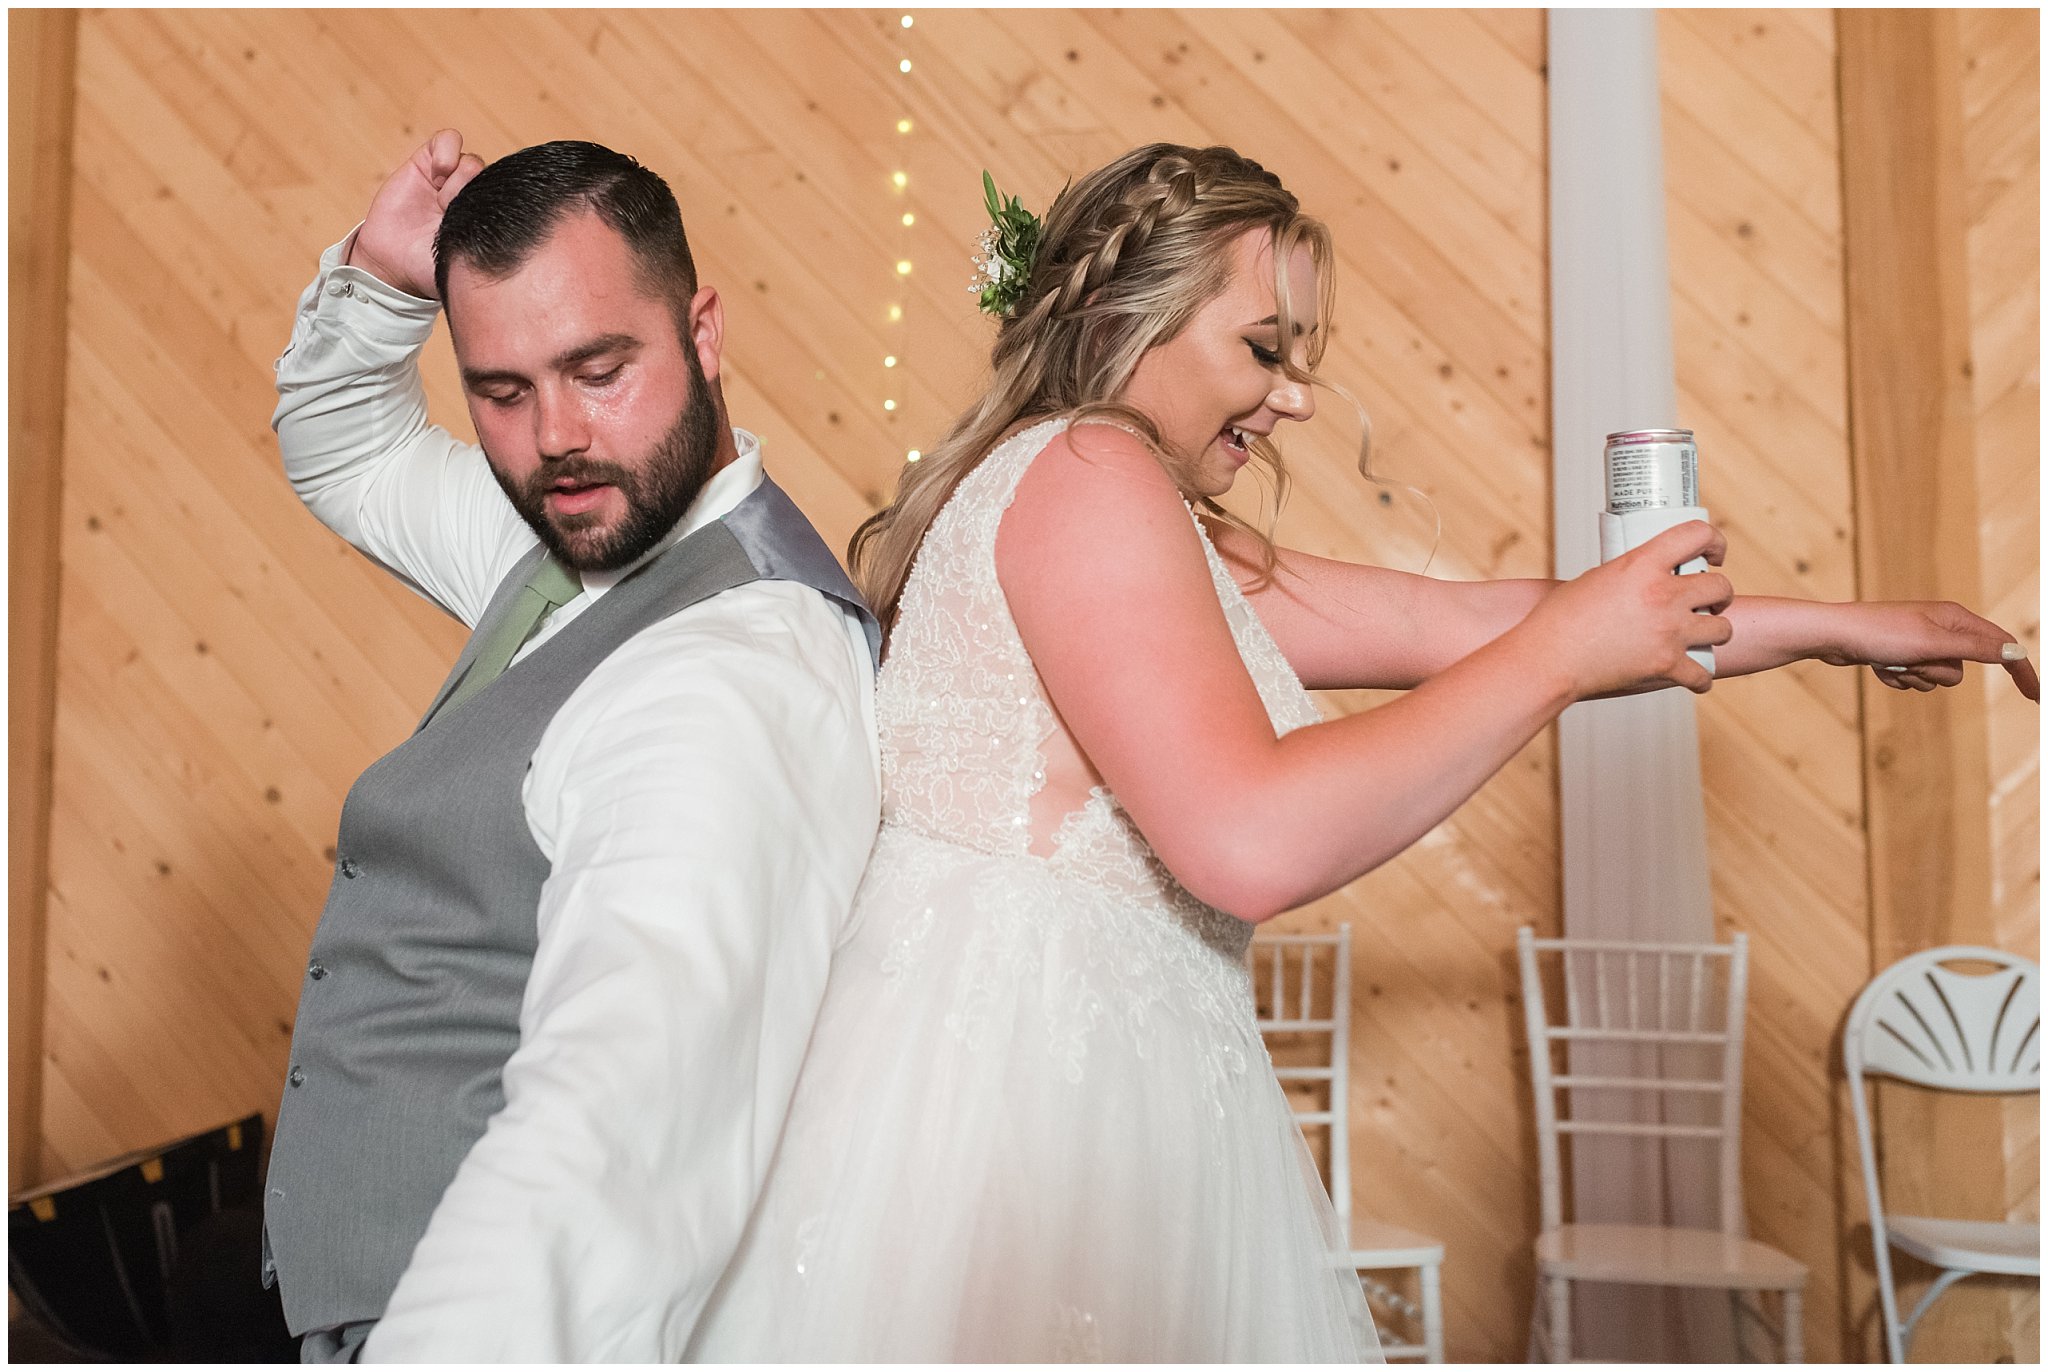 Party dancing in a barn during wedding reception | Sage Green and Gray Summer Wedding at Oak Hills | Jessie and Dallin Photography